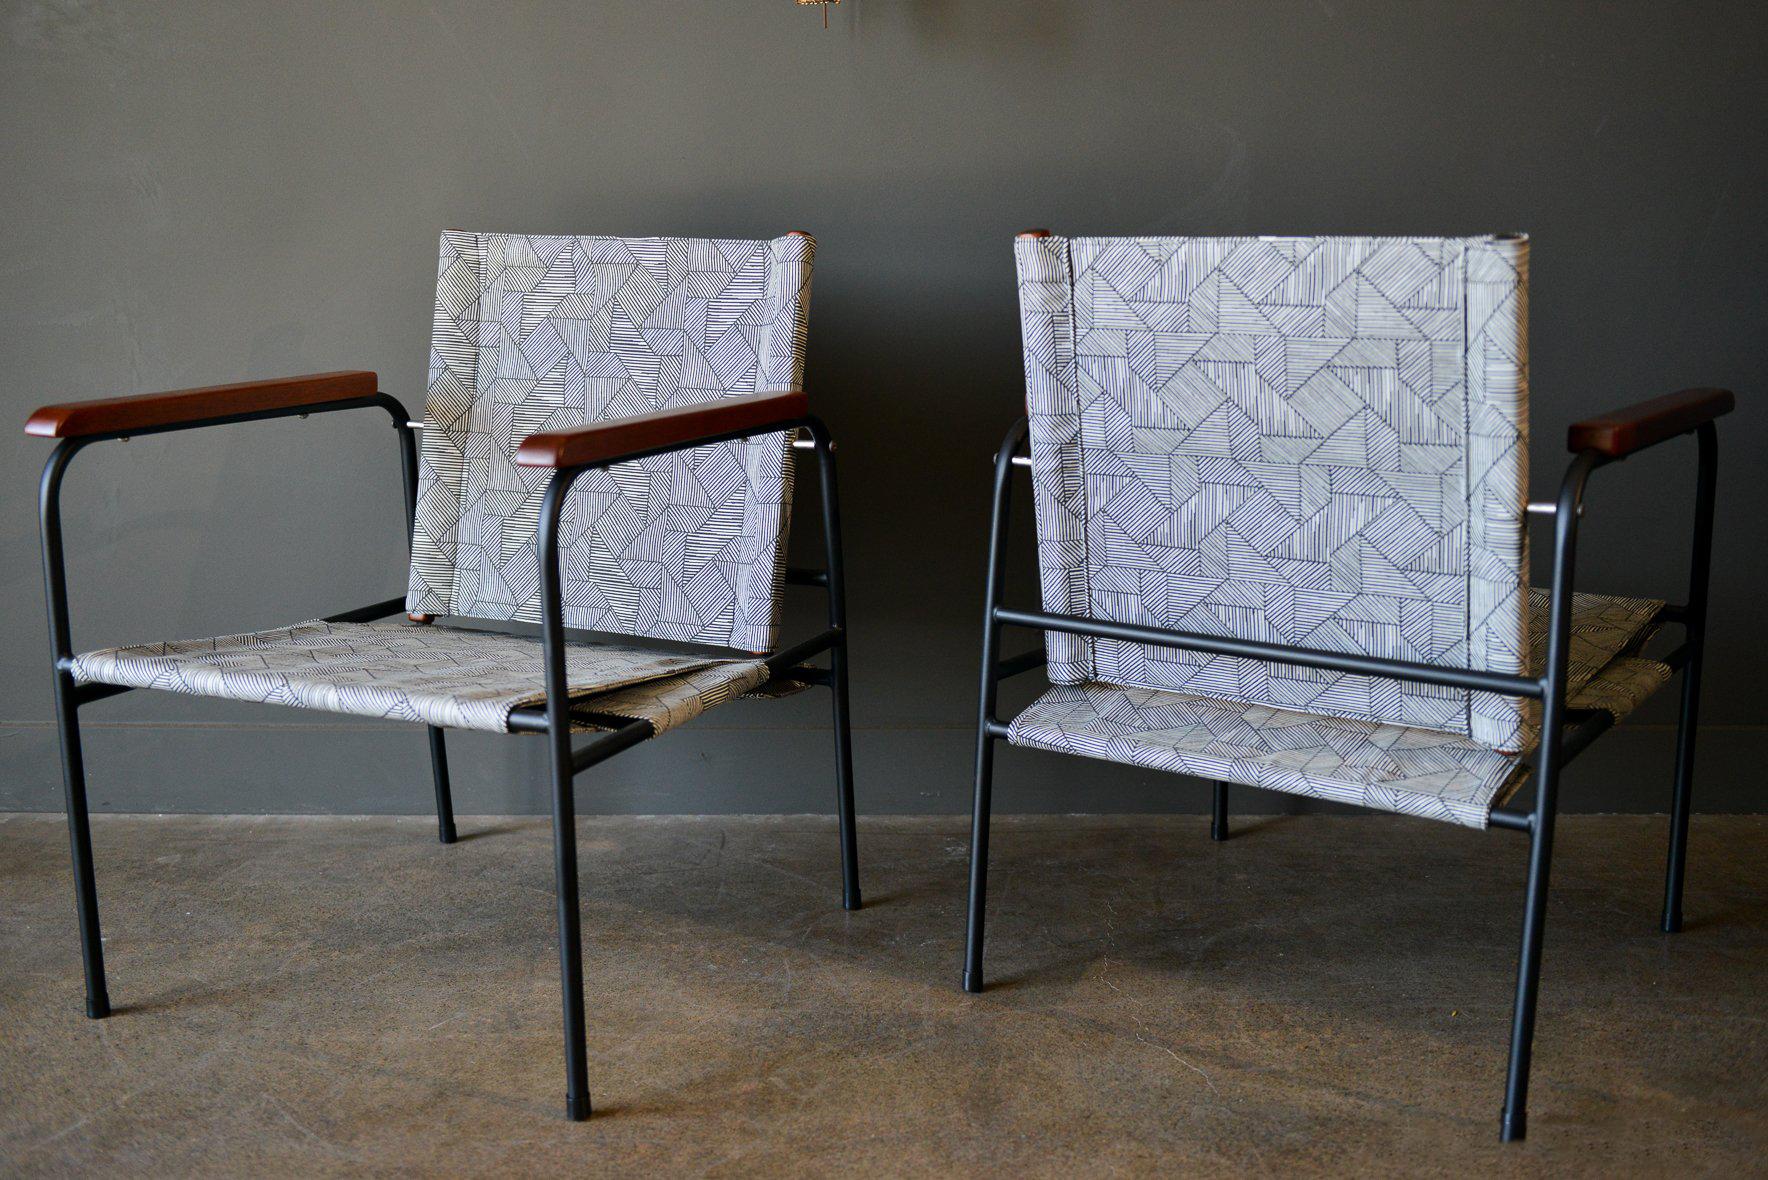 Pair of vintage Patio chairs, circa 1970. Professionally restored with new black powder coat on the metal frame, refinished wood armrests and new geometric pattern black and white outdoor fabric. Backrest swivels for maximum comfort. 

Measure 23